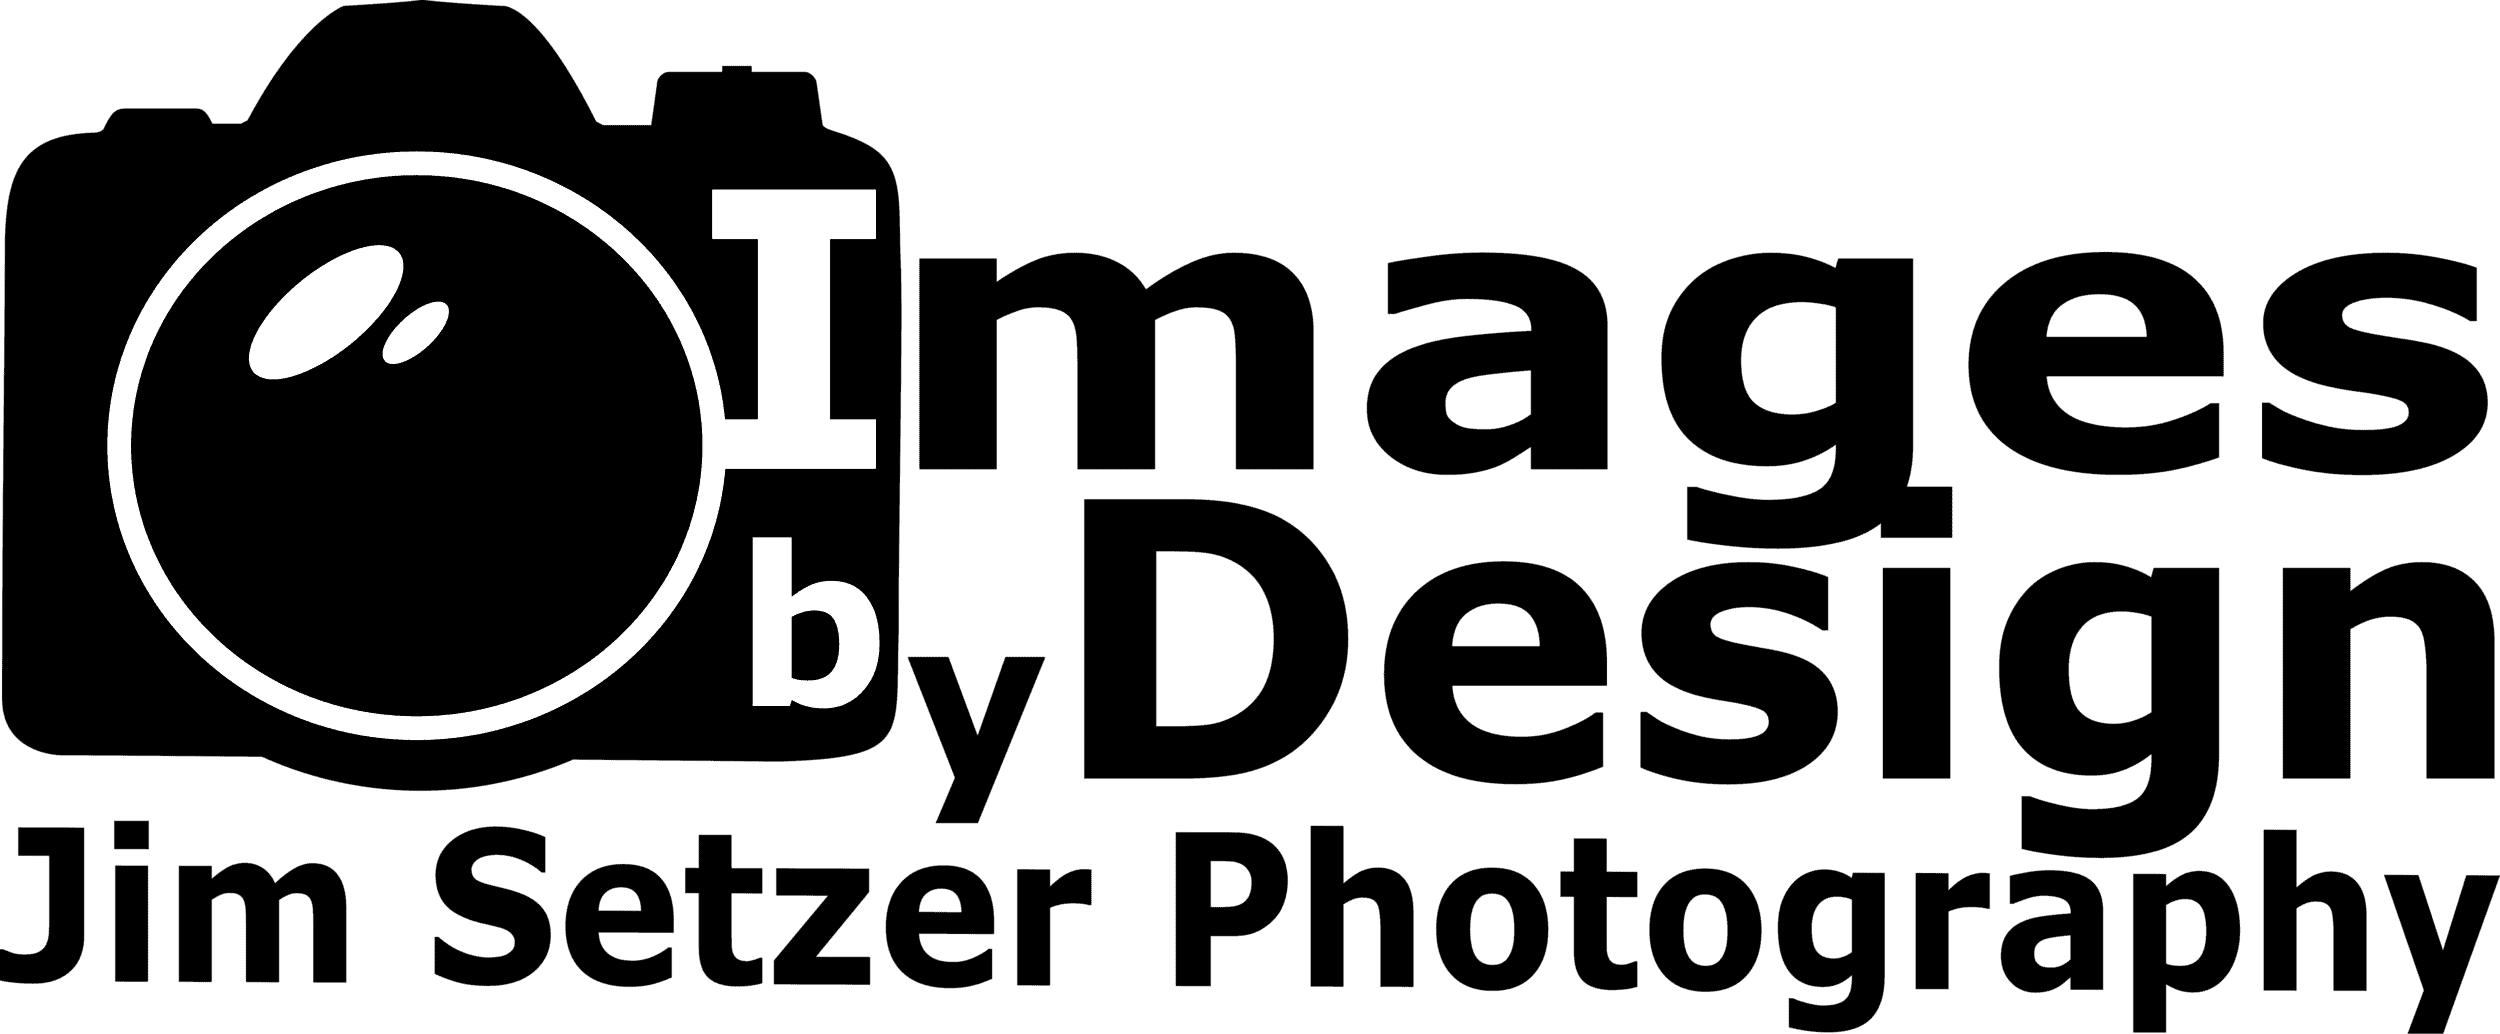 Images by Design